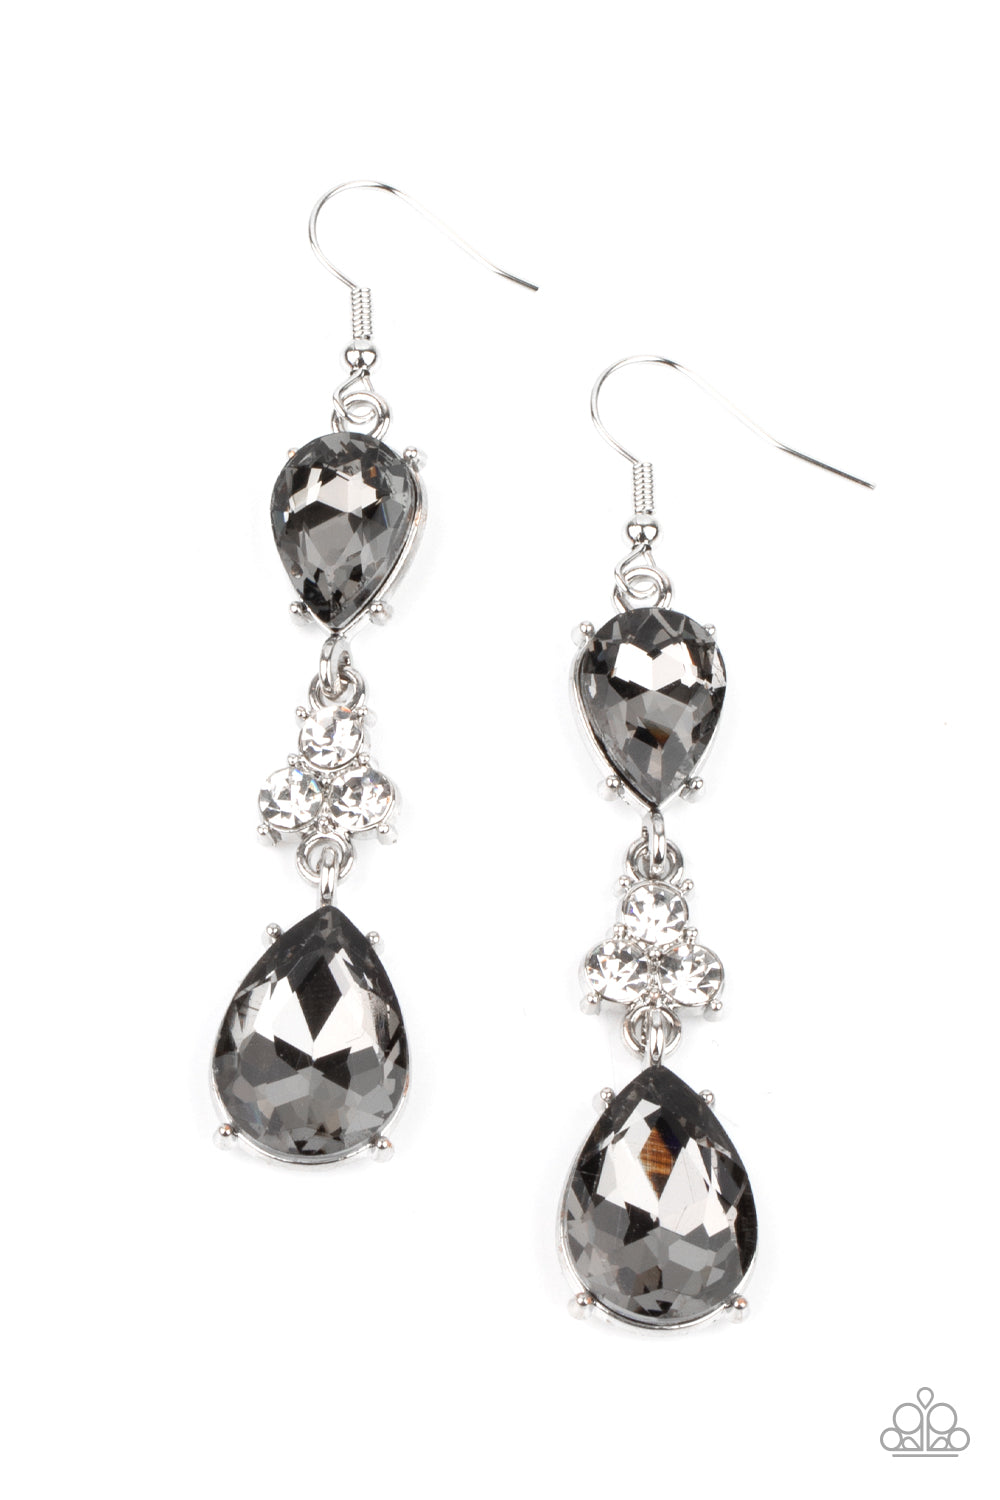 Once Upon a Twinkle - Silver Earrings - Paparazzi Accessories - Paparazzi Accessories 